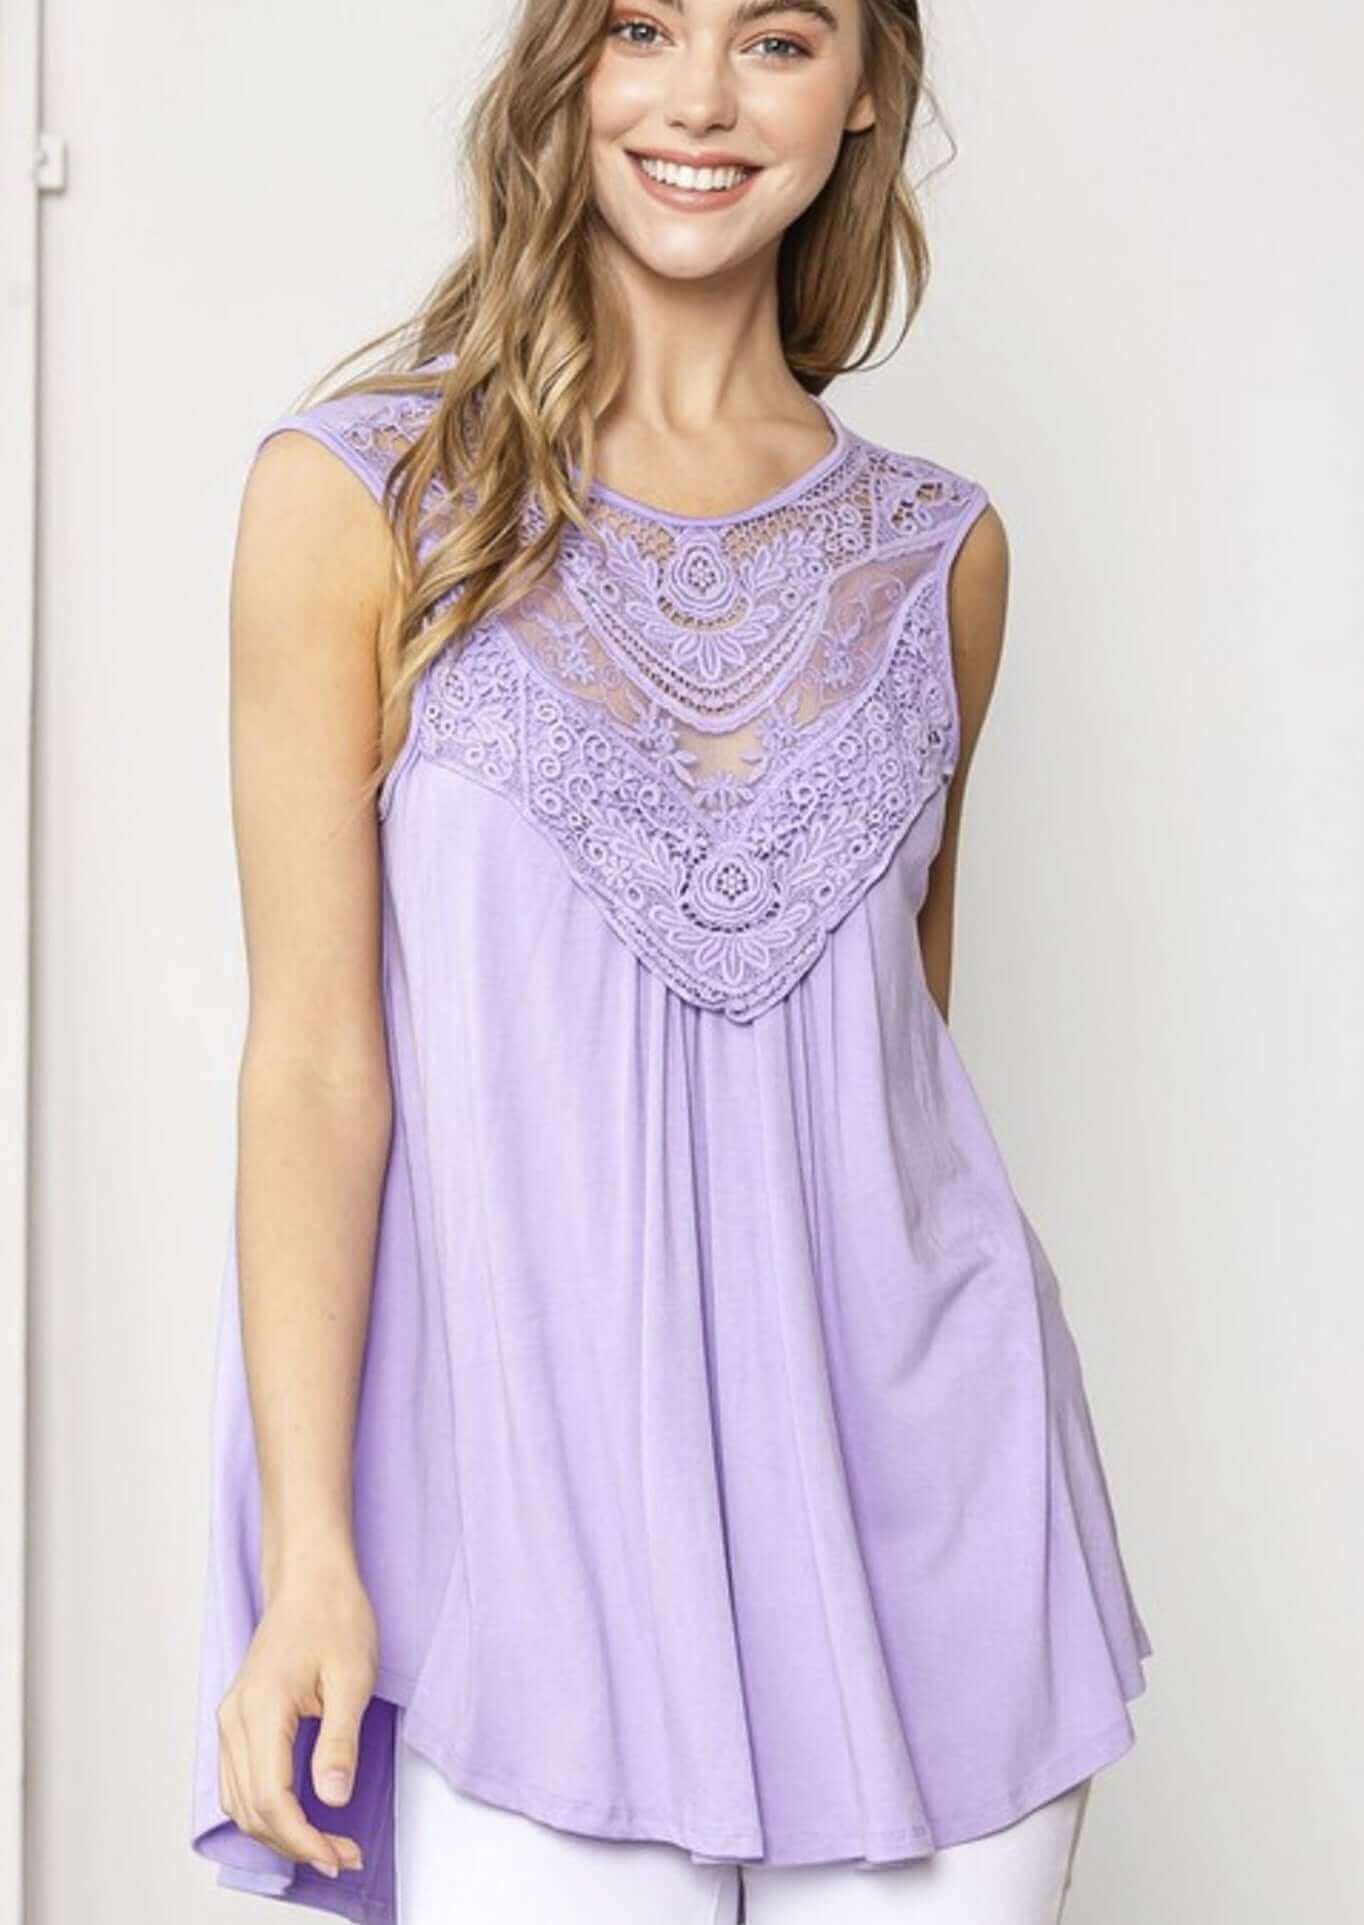 Lavender Embroidered Lace Neckline Ladies Dressy Sleeveless Soft & Flowy Summer Top | Made in USA | Classy Cozy Cool Made in America Boutique